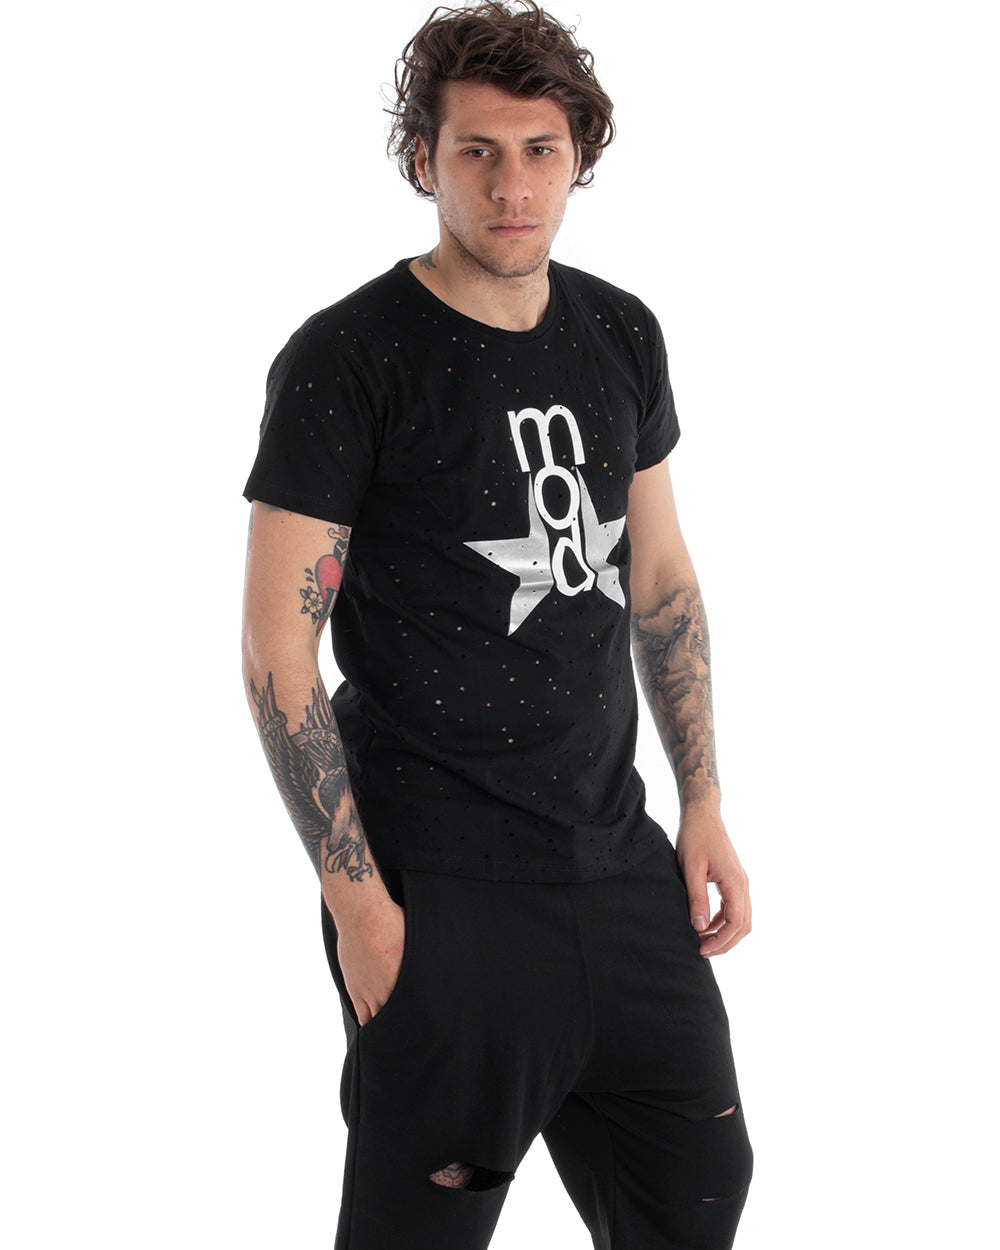 Men's T-shirt Short Sleeve Printed Round Neck Perforated Solid Color Black GIOSAL